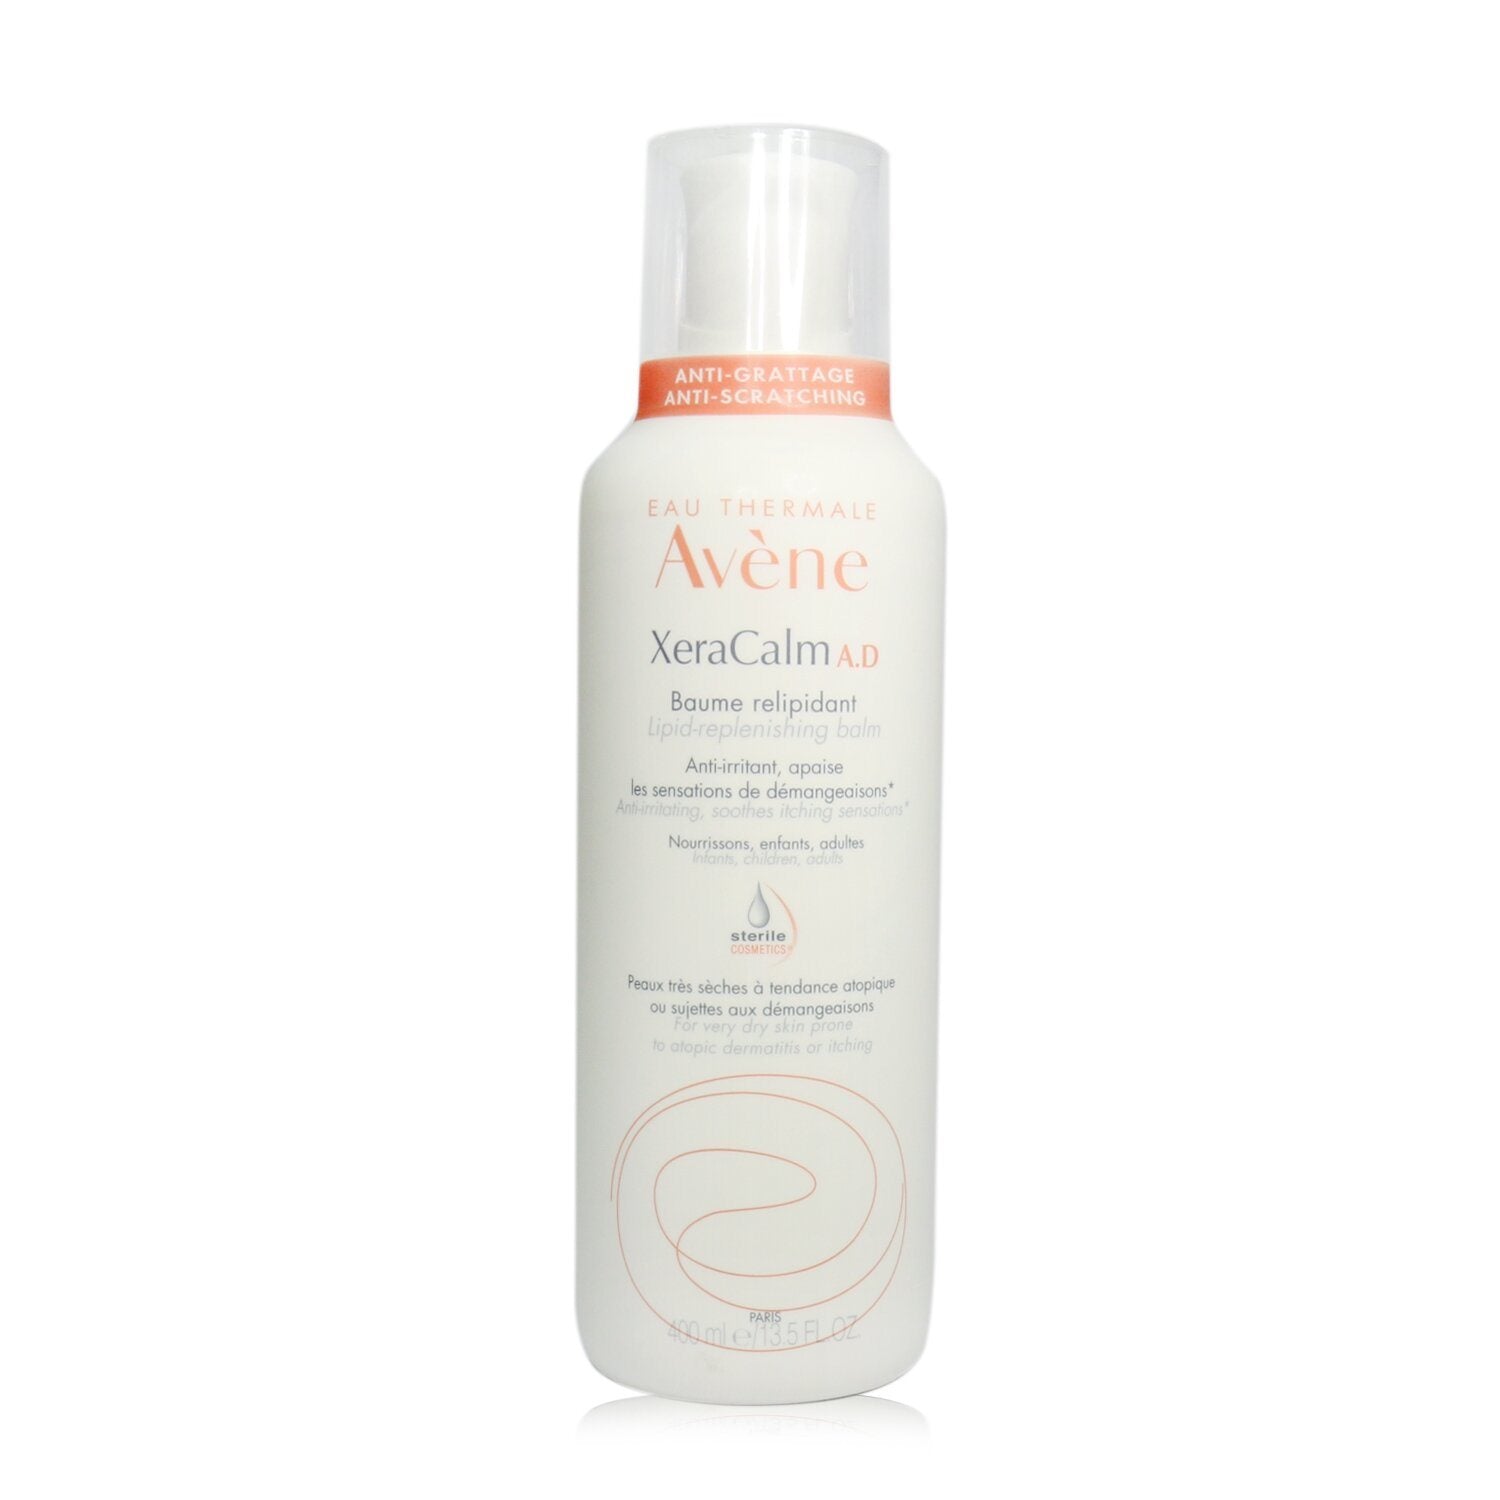 Avene moisturizing body lotion specifically for sensitive skin with atopic dermatitis, 200 ml.
XeraCalm A.D Lipid-Replenishing Balm - For Very Dry Skin Prone to Atopic Dermatitis or Itching.